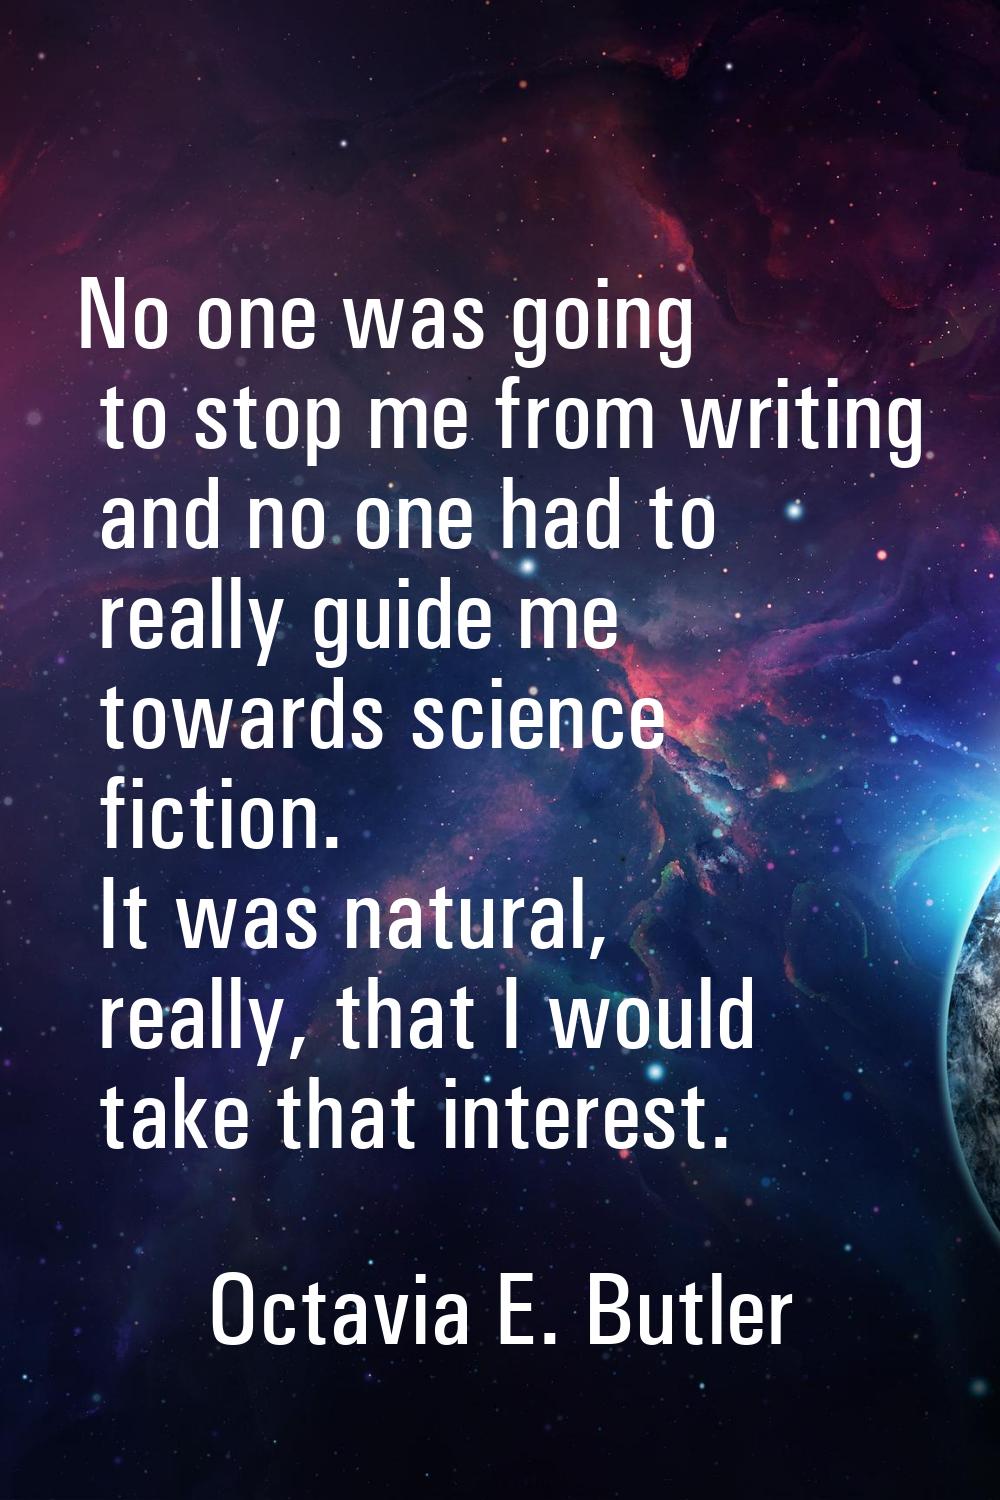 No one was going to stop me from writing and no one had to really guide me towards science fiction.